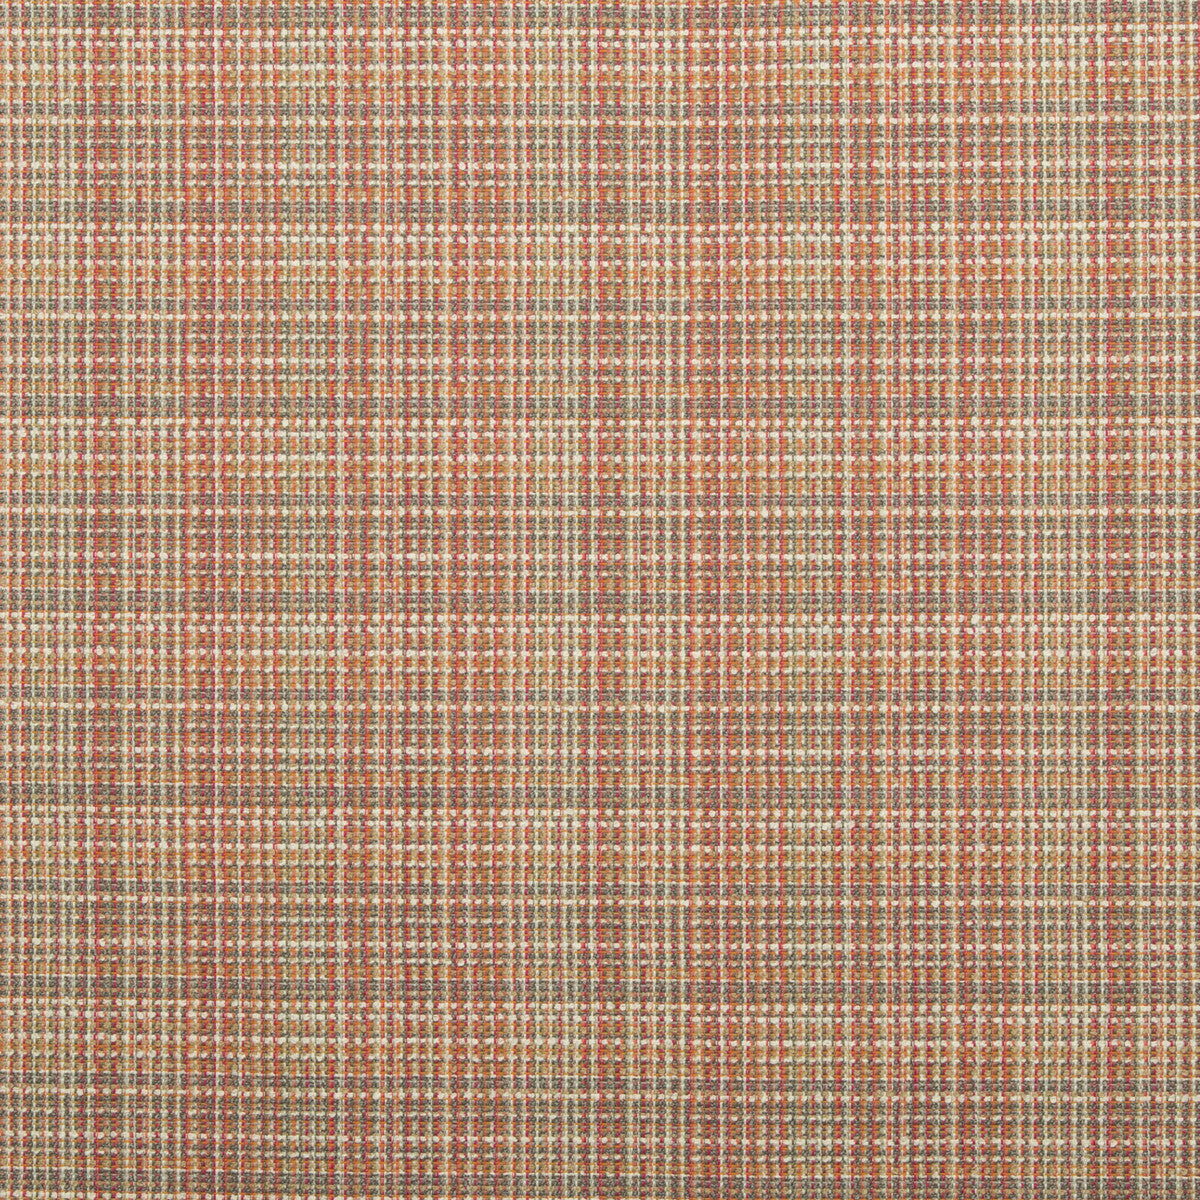 Vibrata fabric in carrot color - pattern 34501.911.0 - by Kravet Design in the Echo Indoor Outdoor Ibiza collection